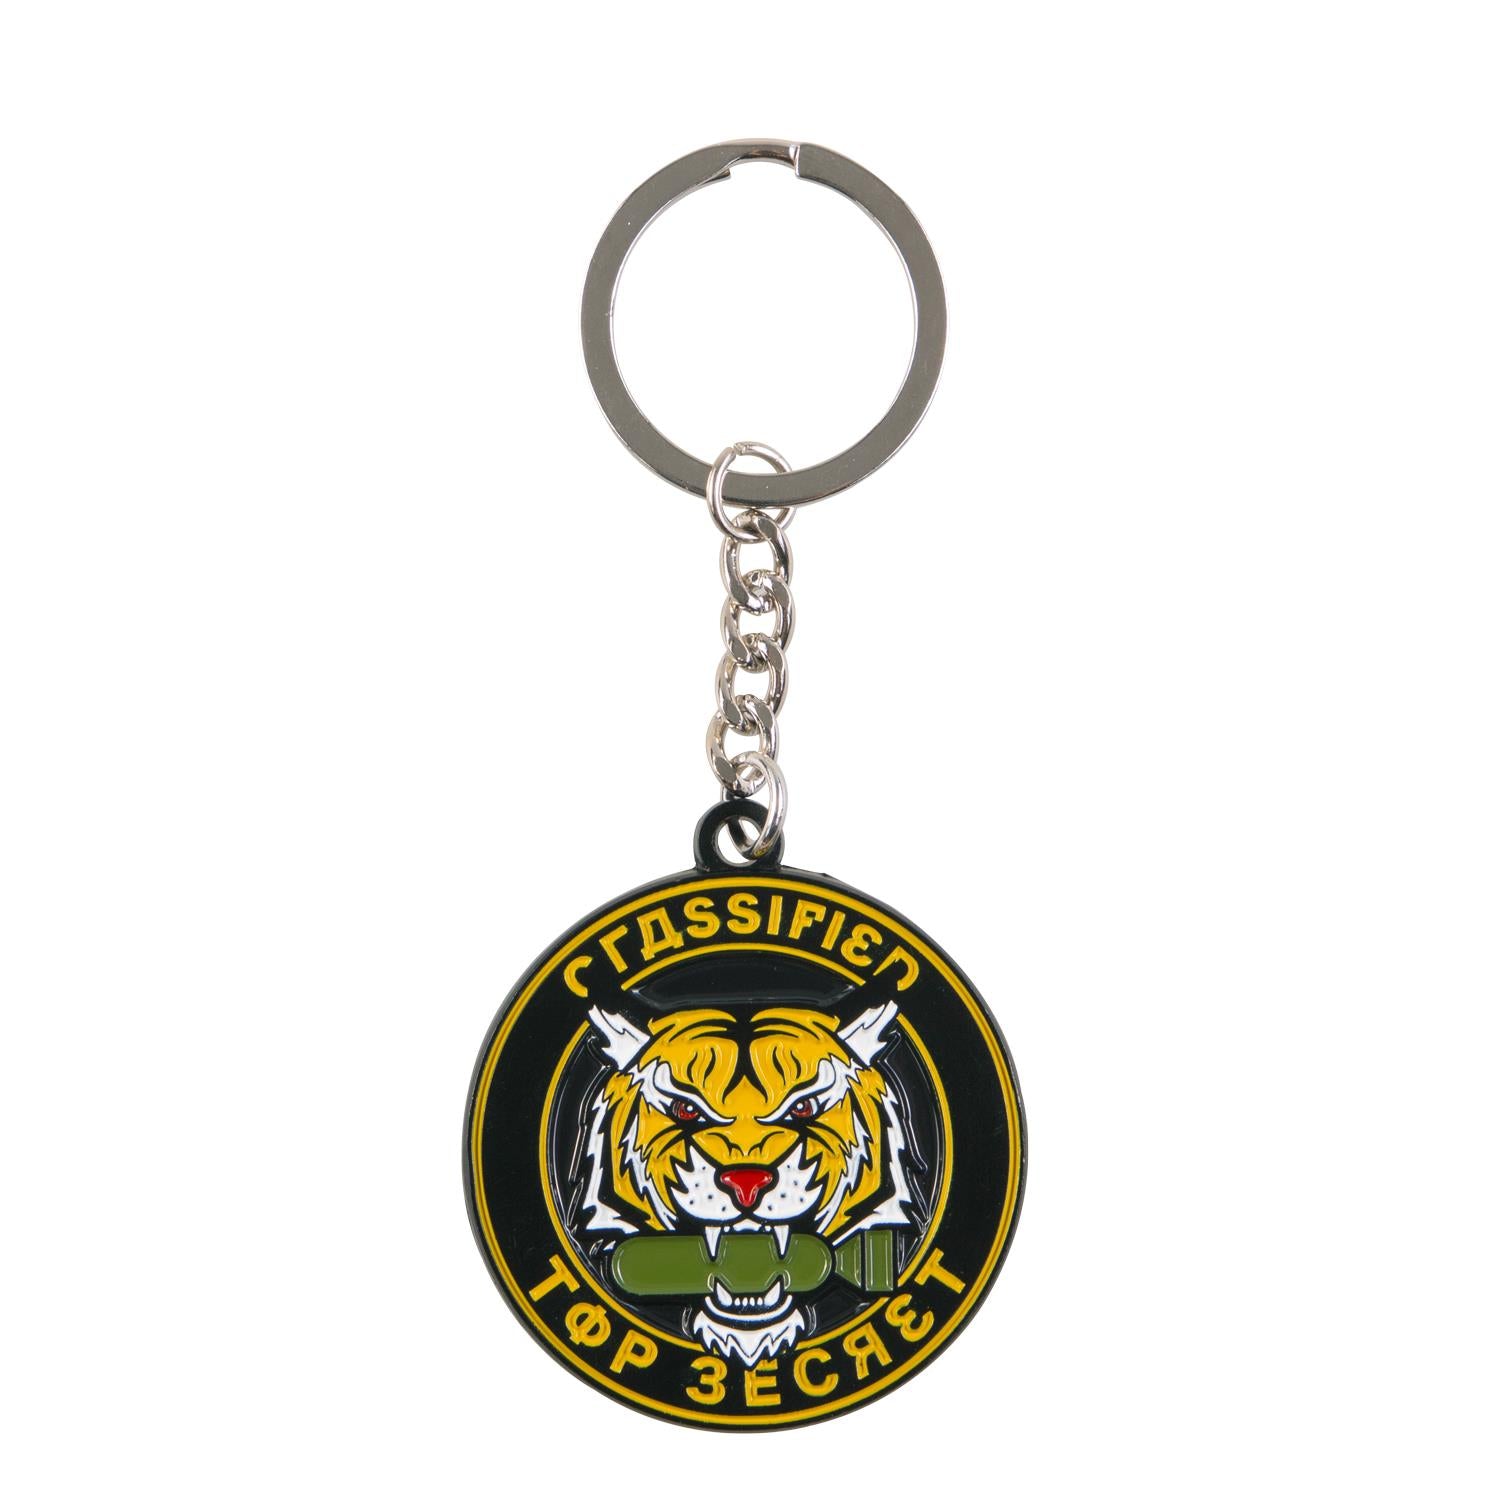 call of duty: black ops cold war "top secret" keychain (online only)